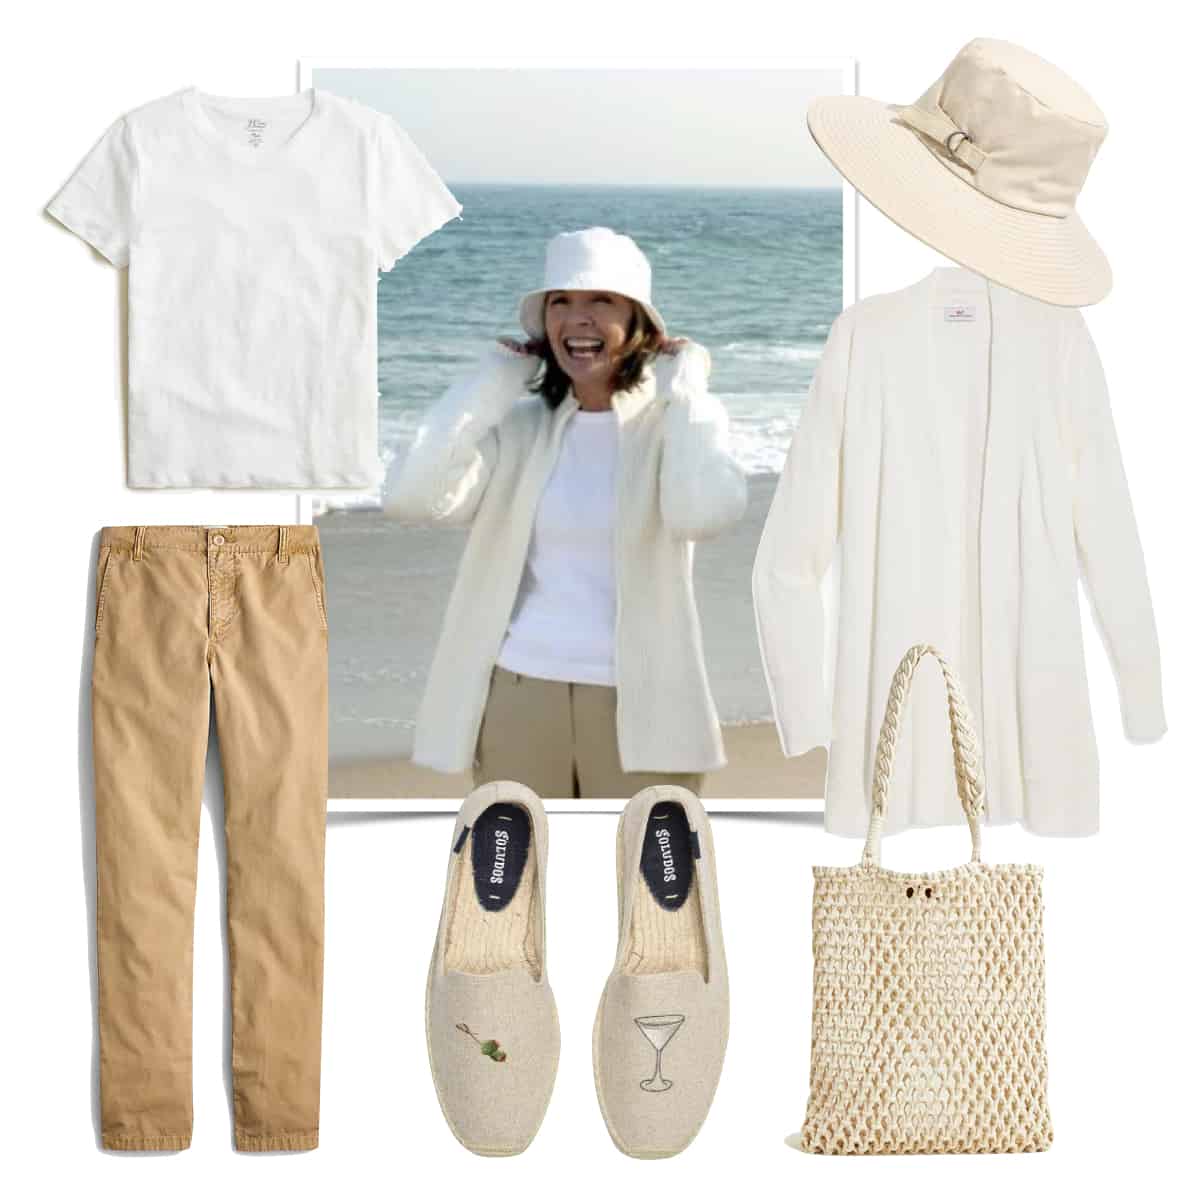 How to get the “coastal grandmother” look